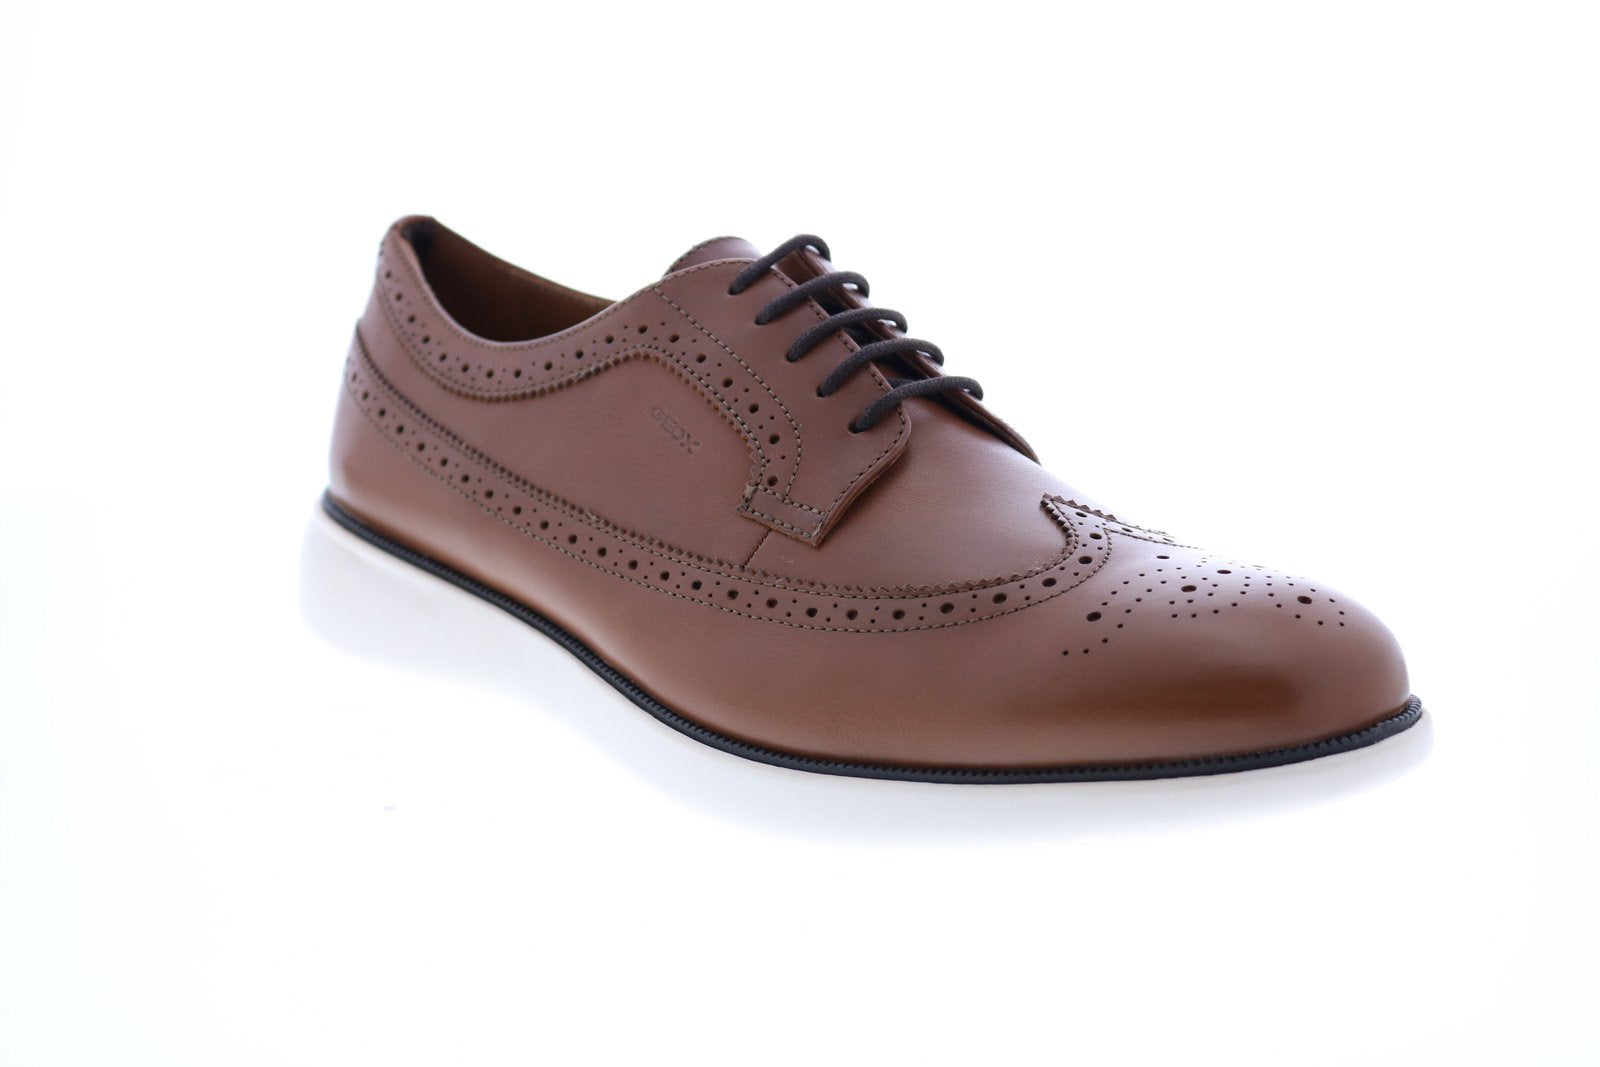 Geox U Winfred C Mens Brown Leather Oxfords & Lace Ups Wingtip Brogu - Ruze Shoes